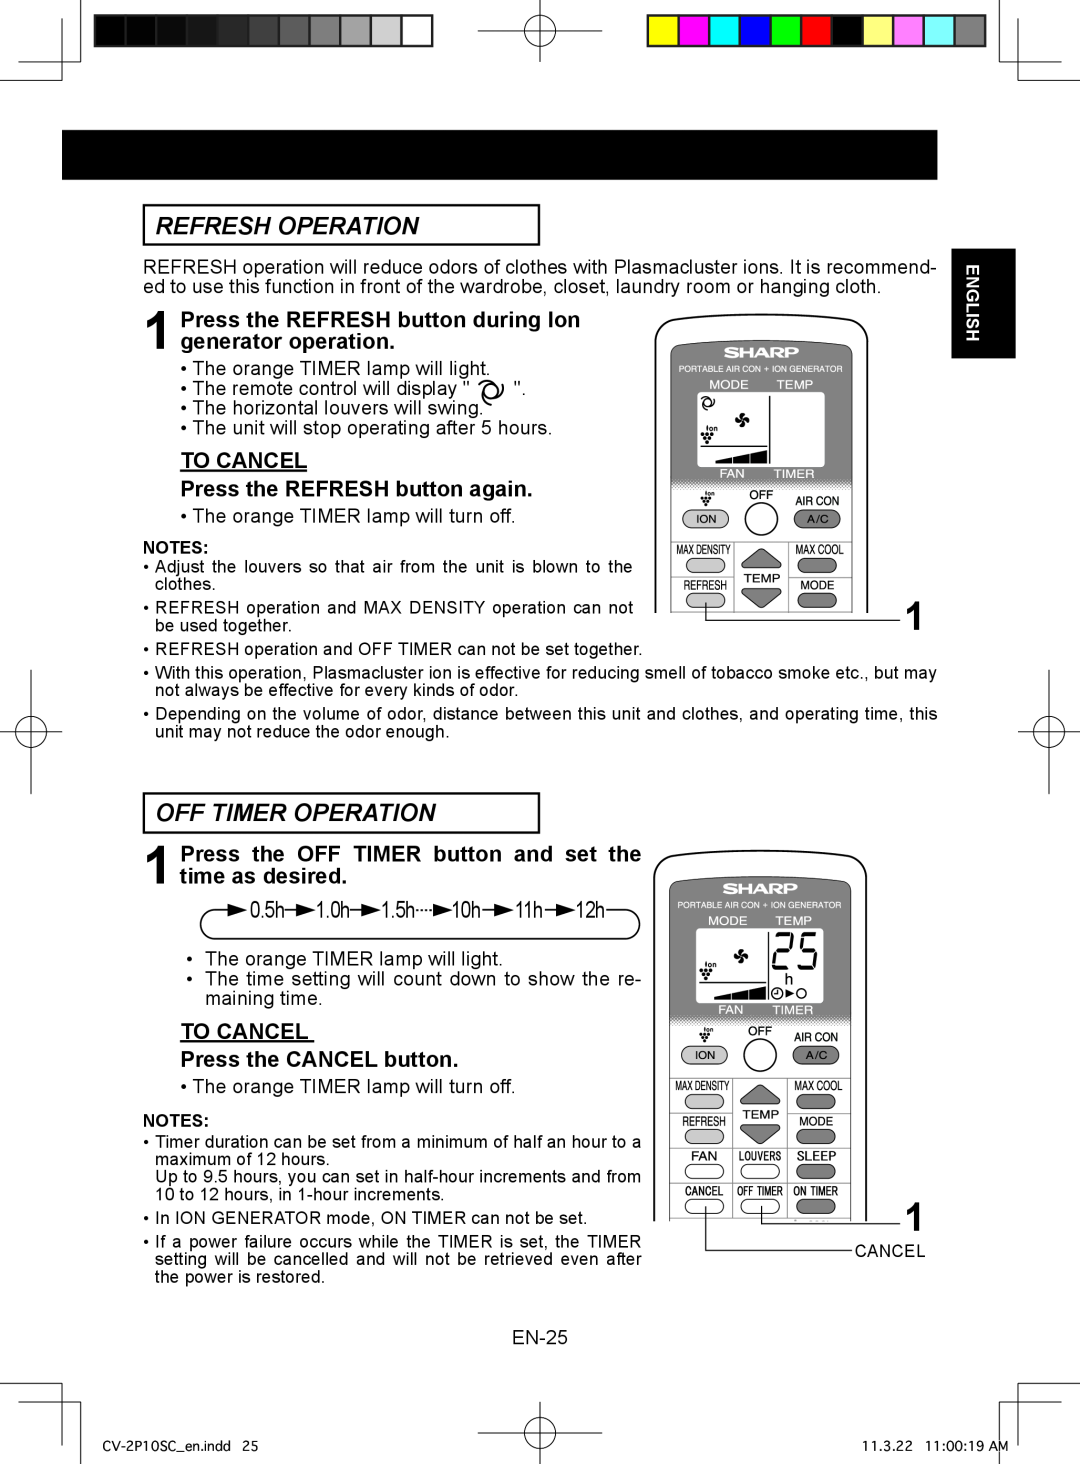 Sharp CV-2P10SC operation manual Refresh Operation, Off Timer Operation, TO CANCEL Press the REFRESH button again, English 